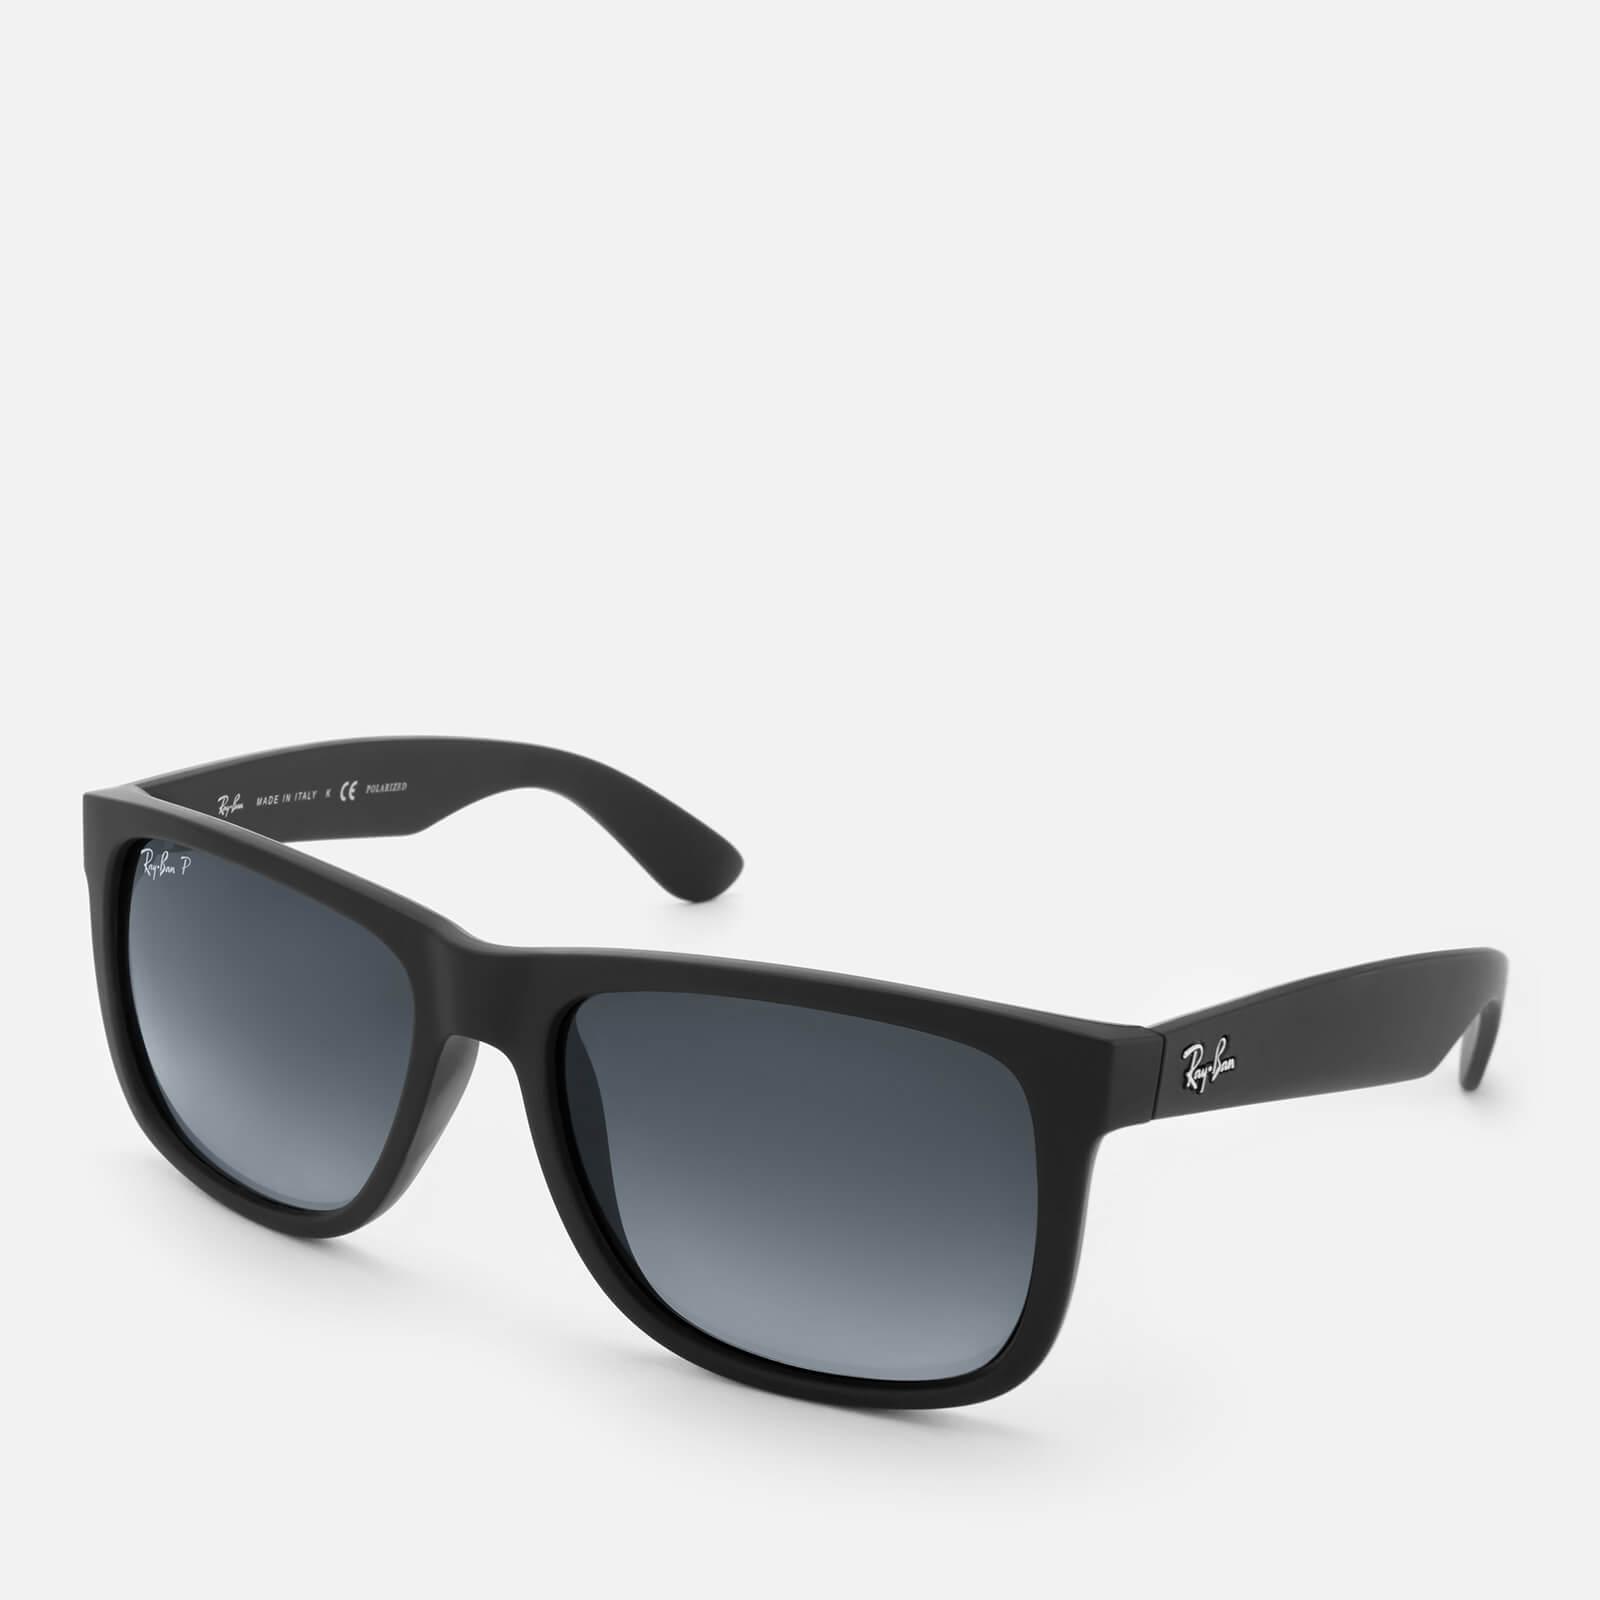 Ray Ban Synthetic Justin Square Frame Sunglasses In Black For Men Lyst ...